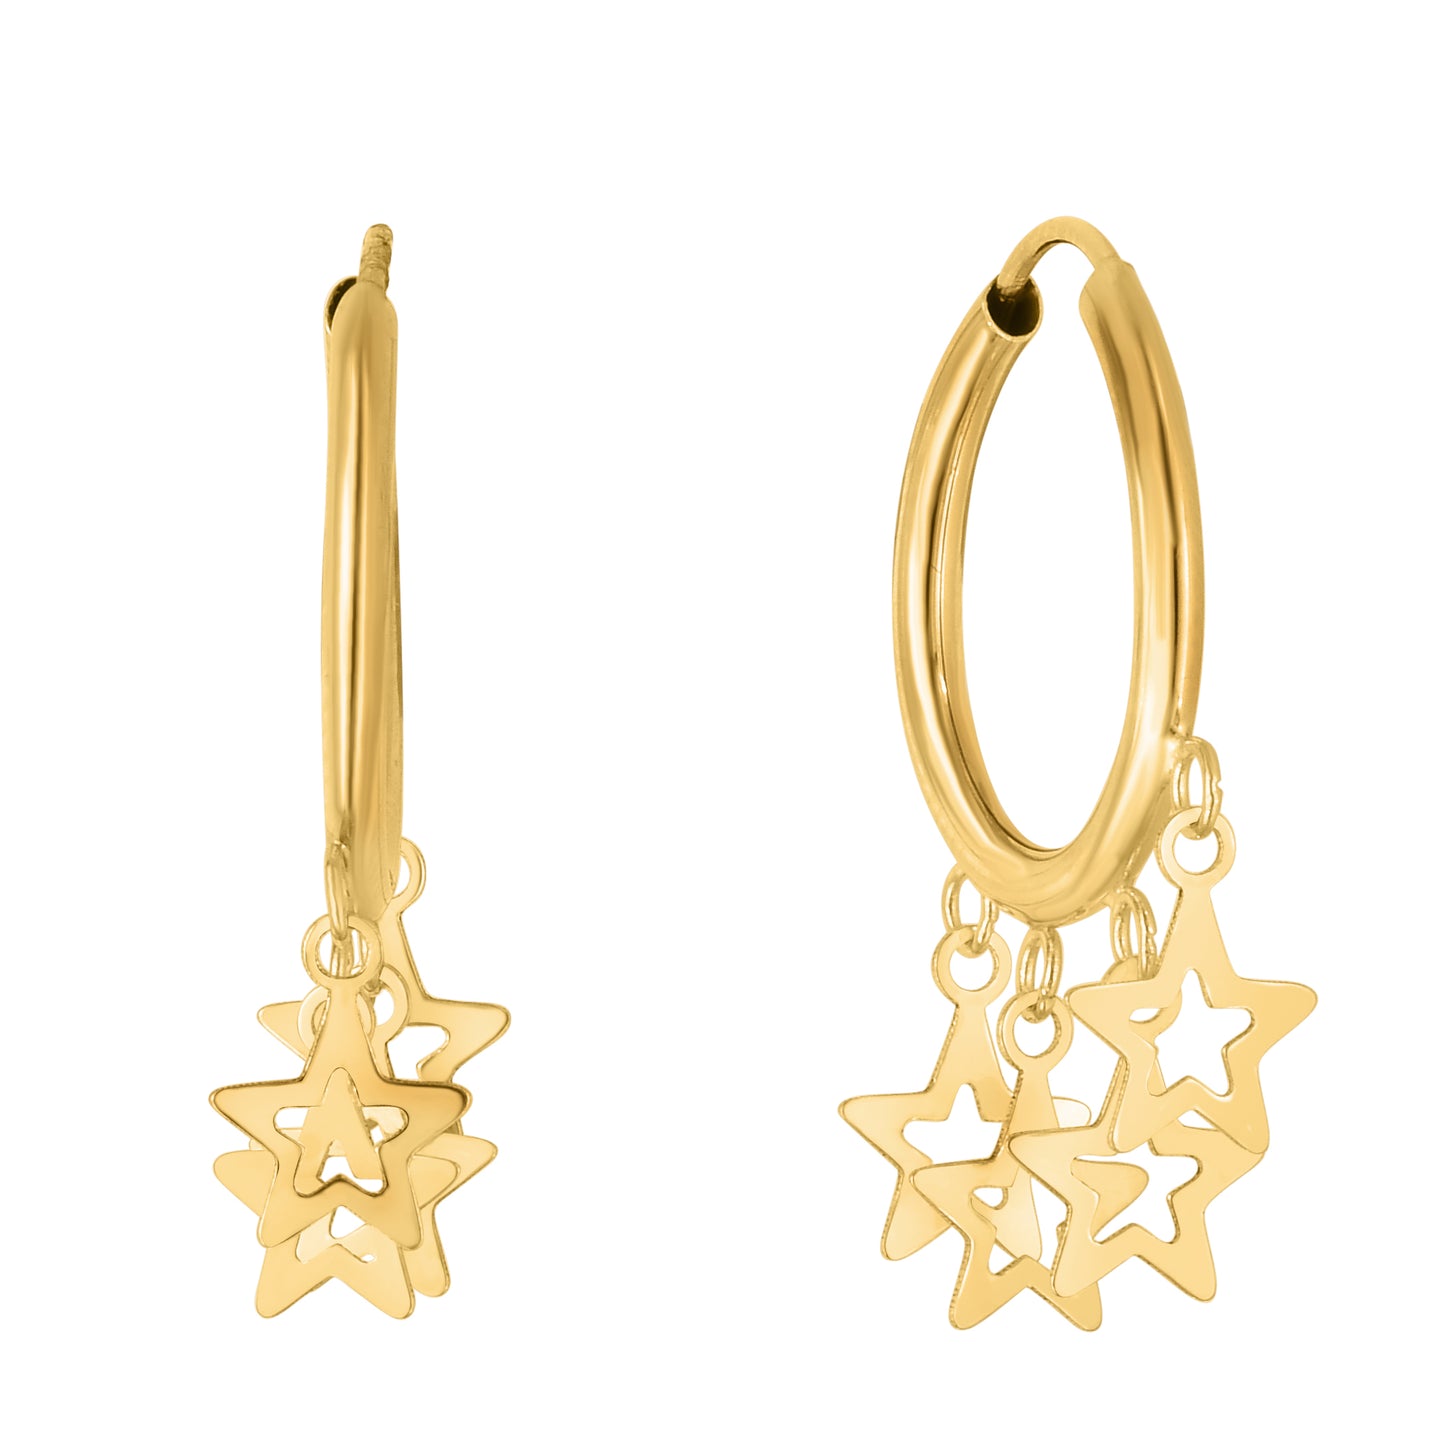 14K Gold Endless Hoop Earrings with Sun Charms